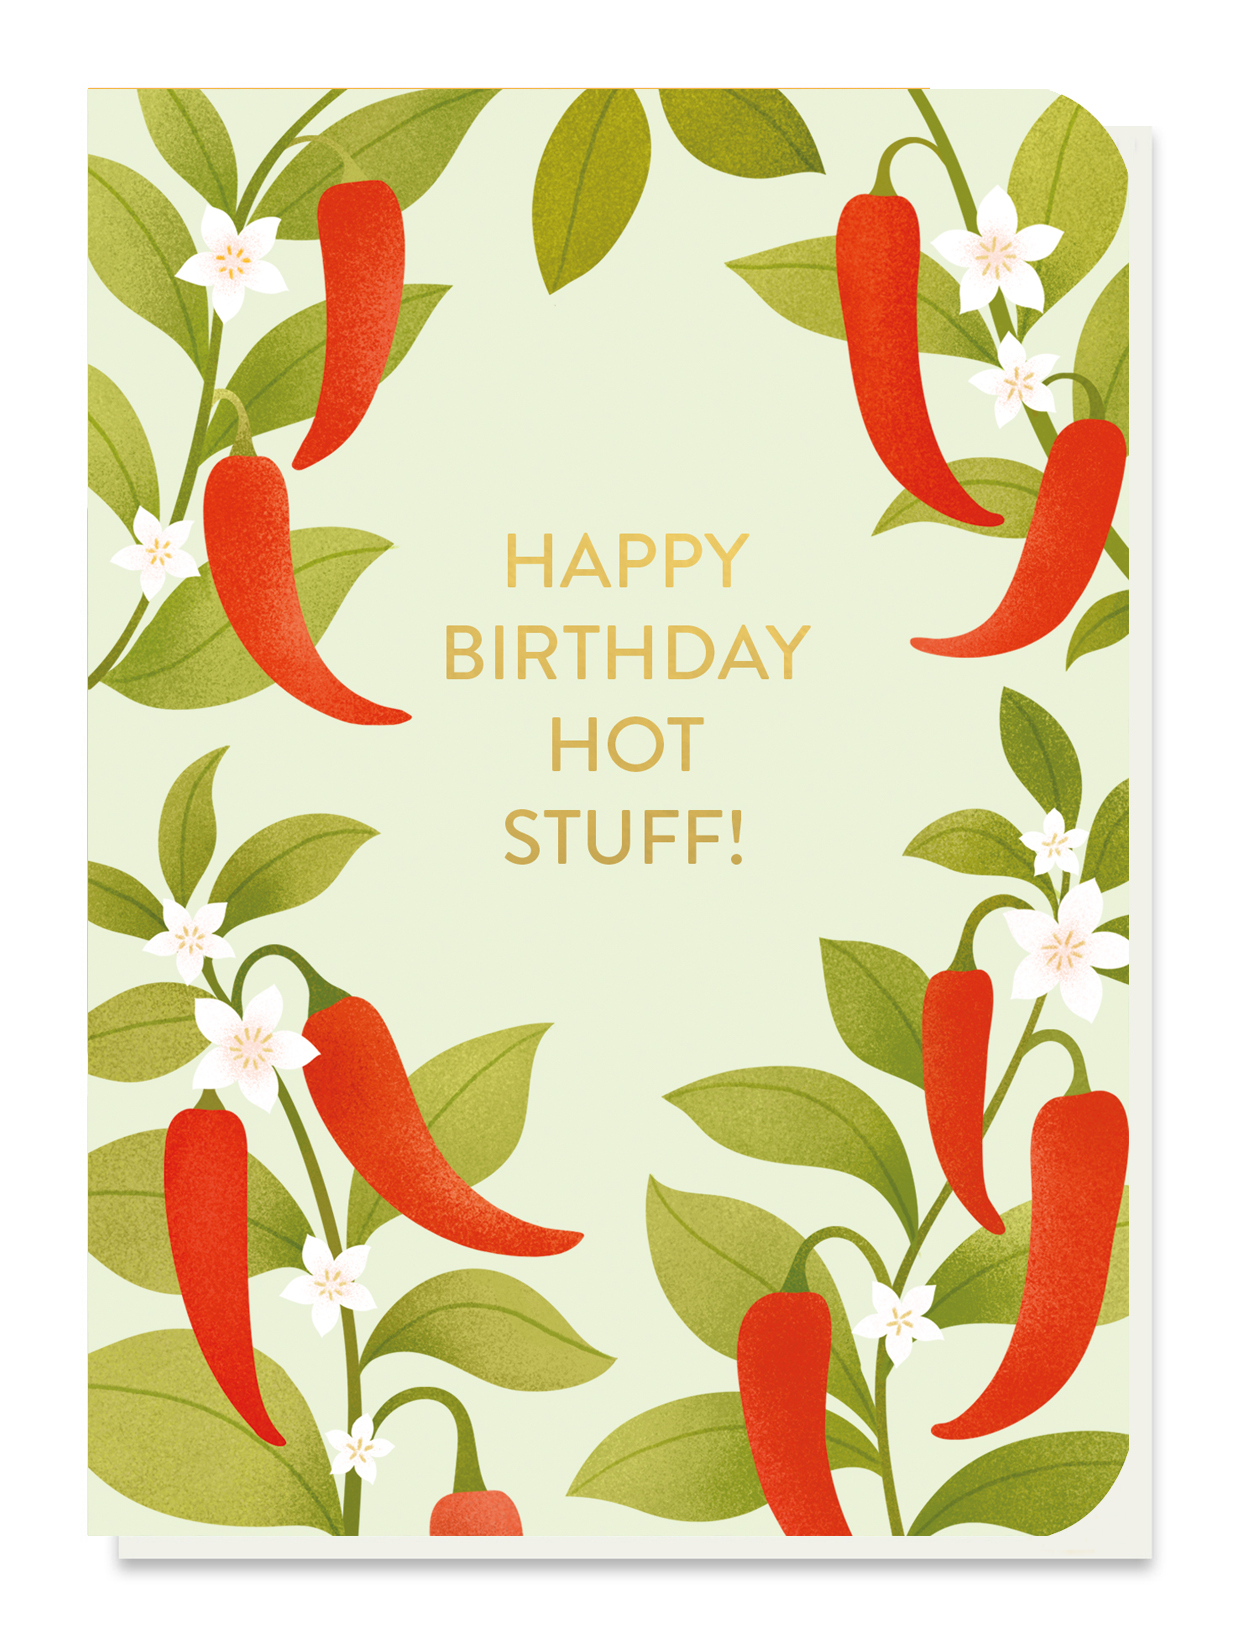 chilli plants card with capsicum chilli seed sticks by stormy knight